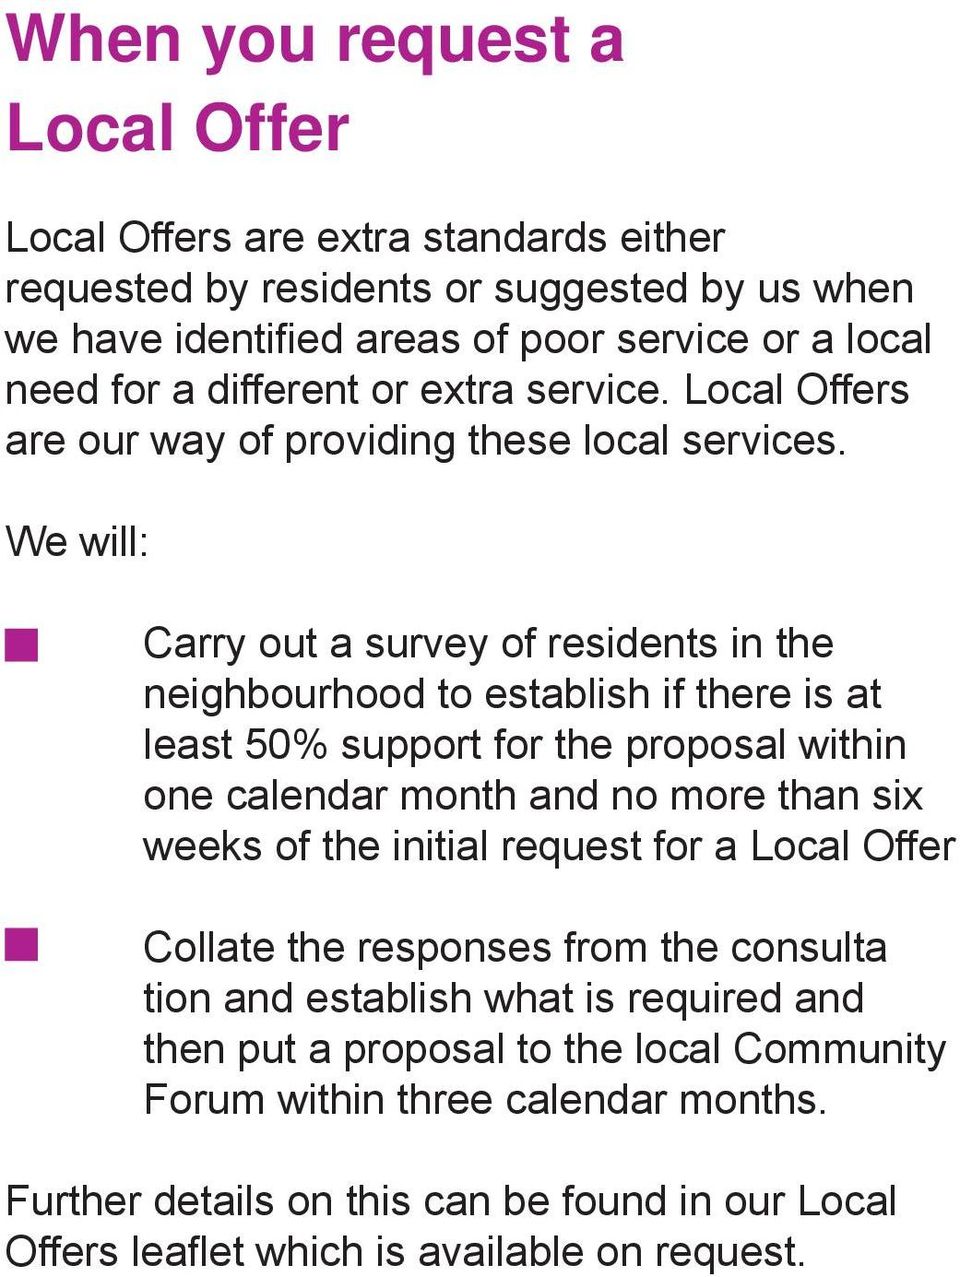 Carry out a survey of residents in the neighbourhood to establish if there is at least 50% support for the proposal within one calendar month and no more than six weeks of the initial